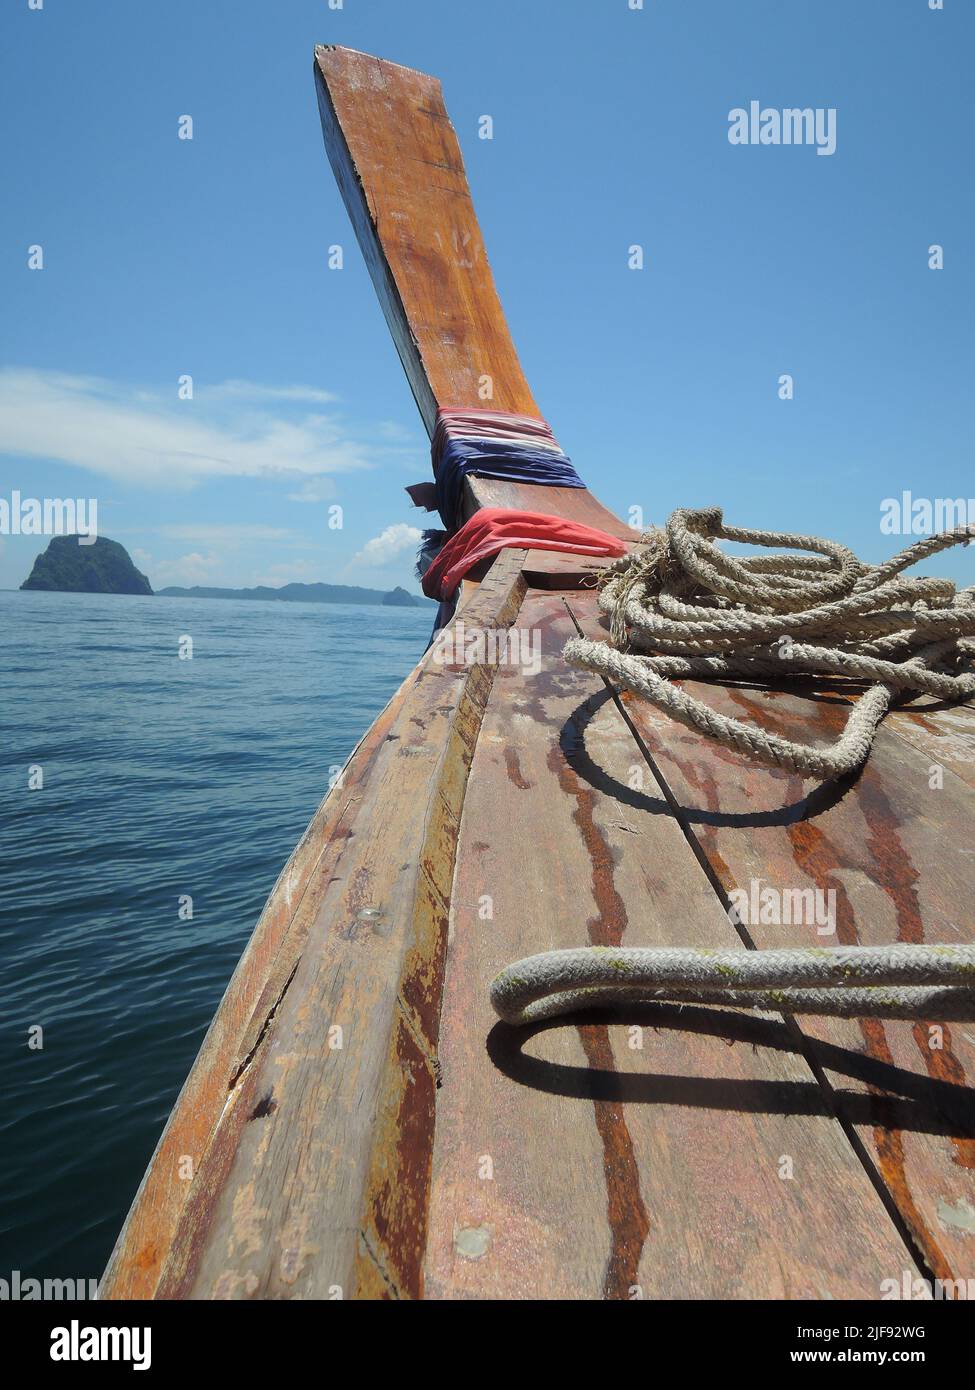 Longtail boat in Thailand Stock Photo